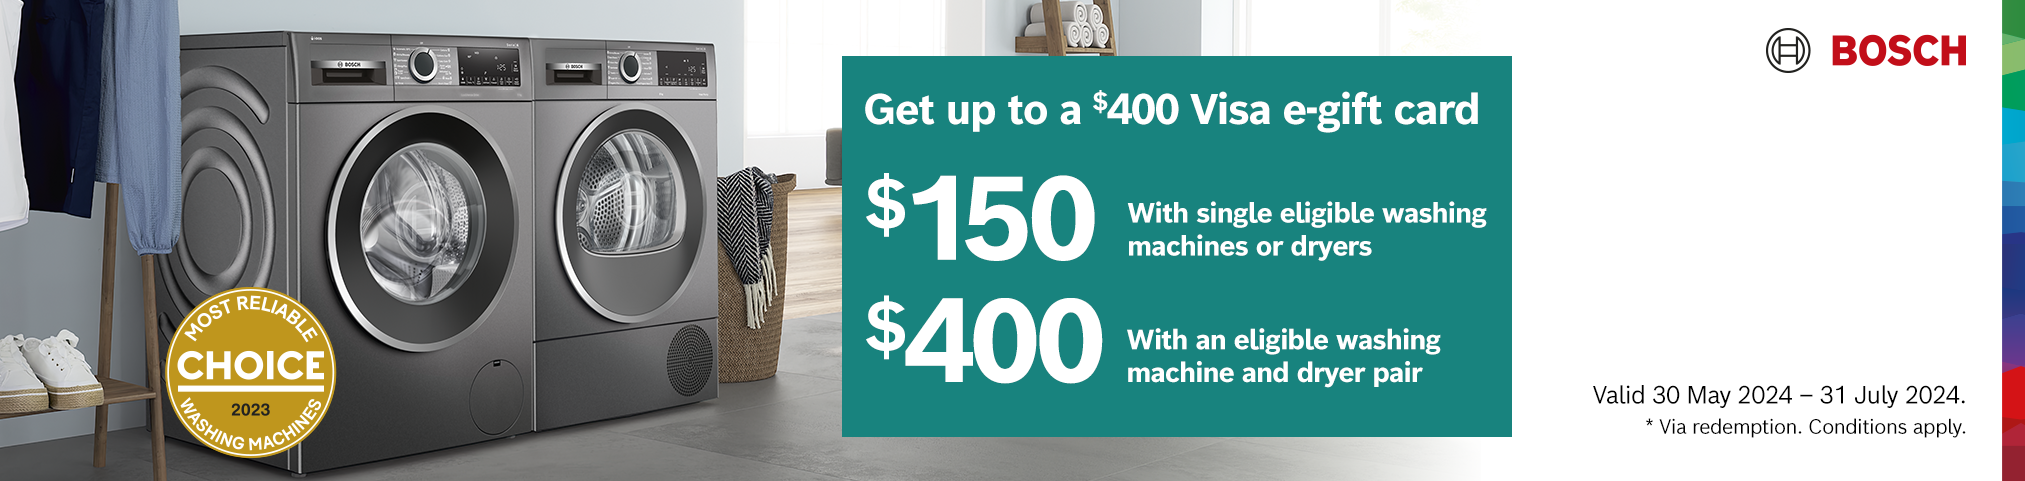 Get A Visa E-Gift Card Valued Up To $400* On Selected Bosch Laundry Appliances